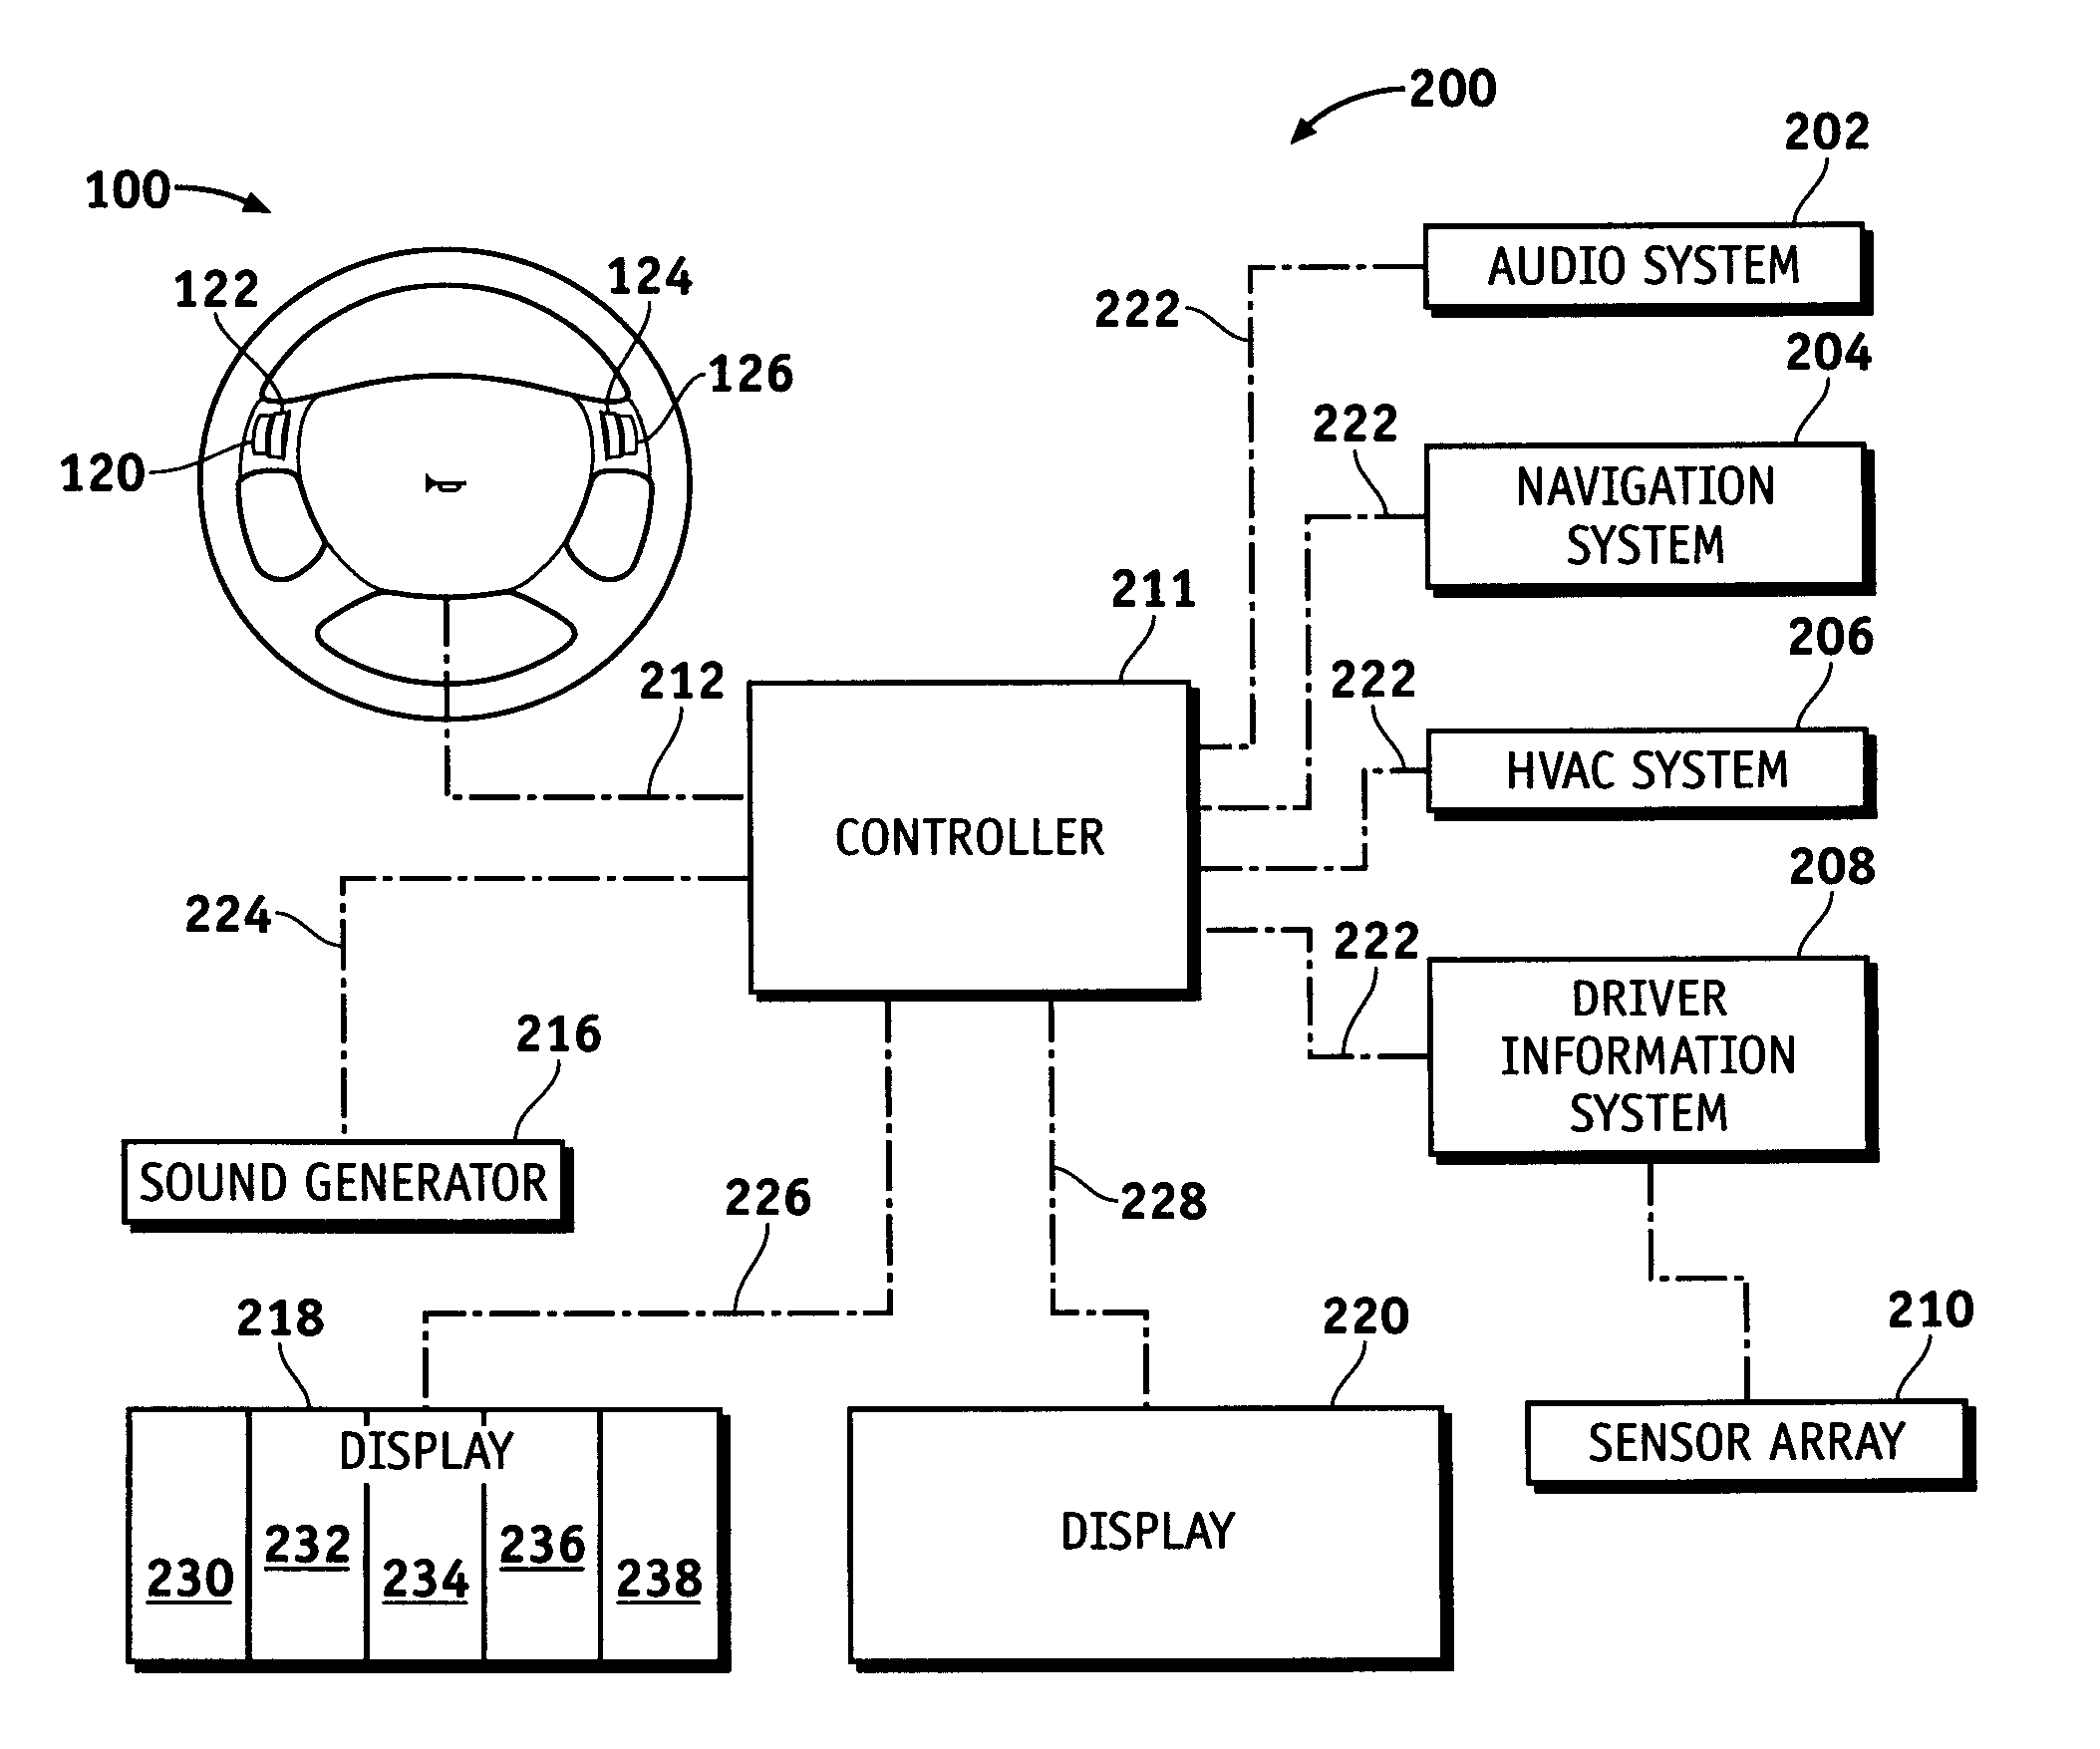 Vehicular Interface Including Steering Wheel Control Assembly